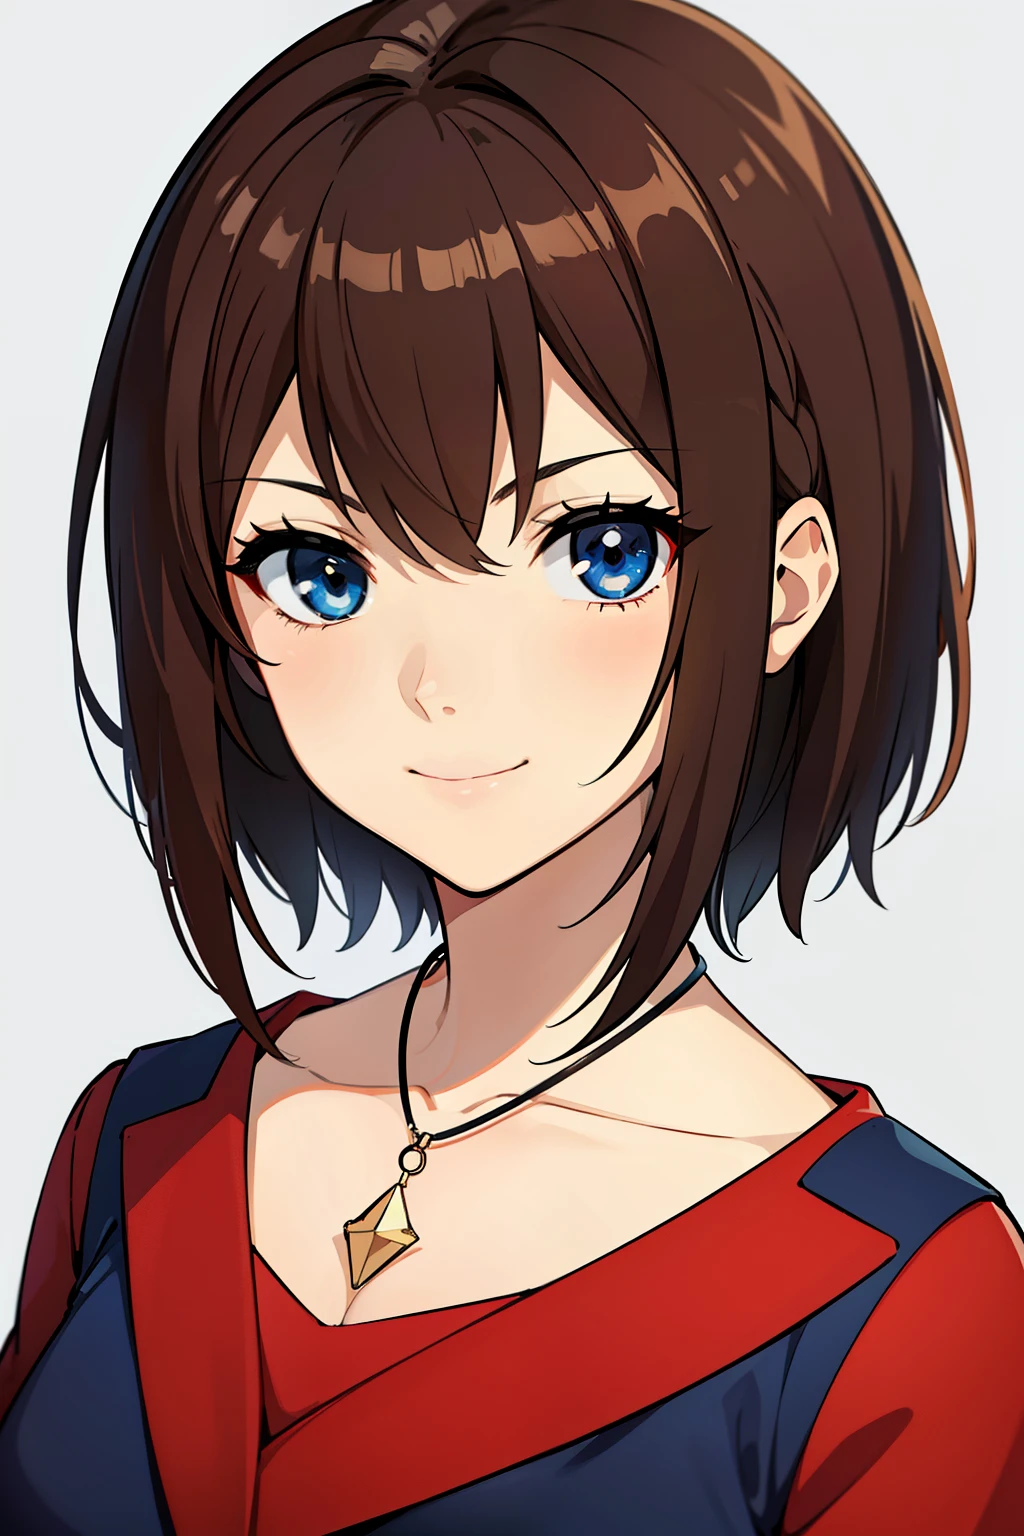 (high-quality, breathtaking),(expressive eyes, perfect face) portrait, 1girl, female, solo, adult woman, mum, age late 20's, brown hair, Heterochromia left eye brown and right eye light blue, short hair shoulder length, white ribbon in hair, gentle smile, loose hair, side bangs, looking at viewer, portrait, happy expression, modern clothing, red and blue jacket, red blouse, black jeans, small necklace shapped elegent, mature, height 5"6